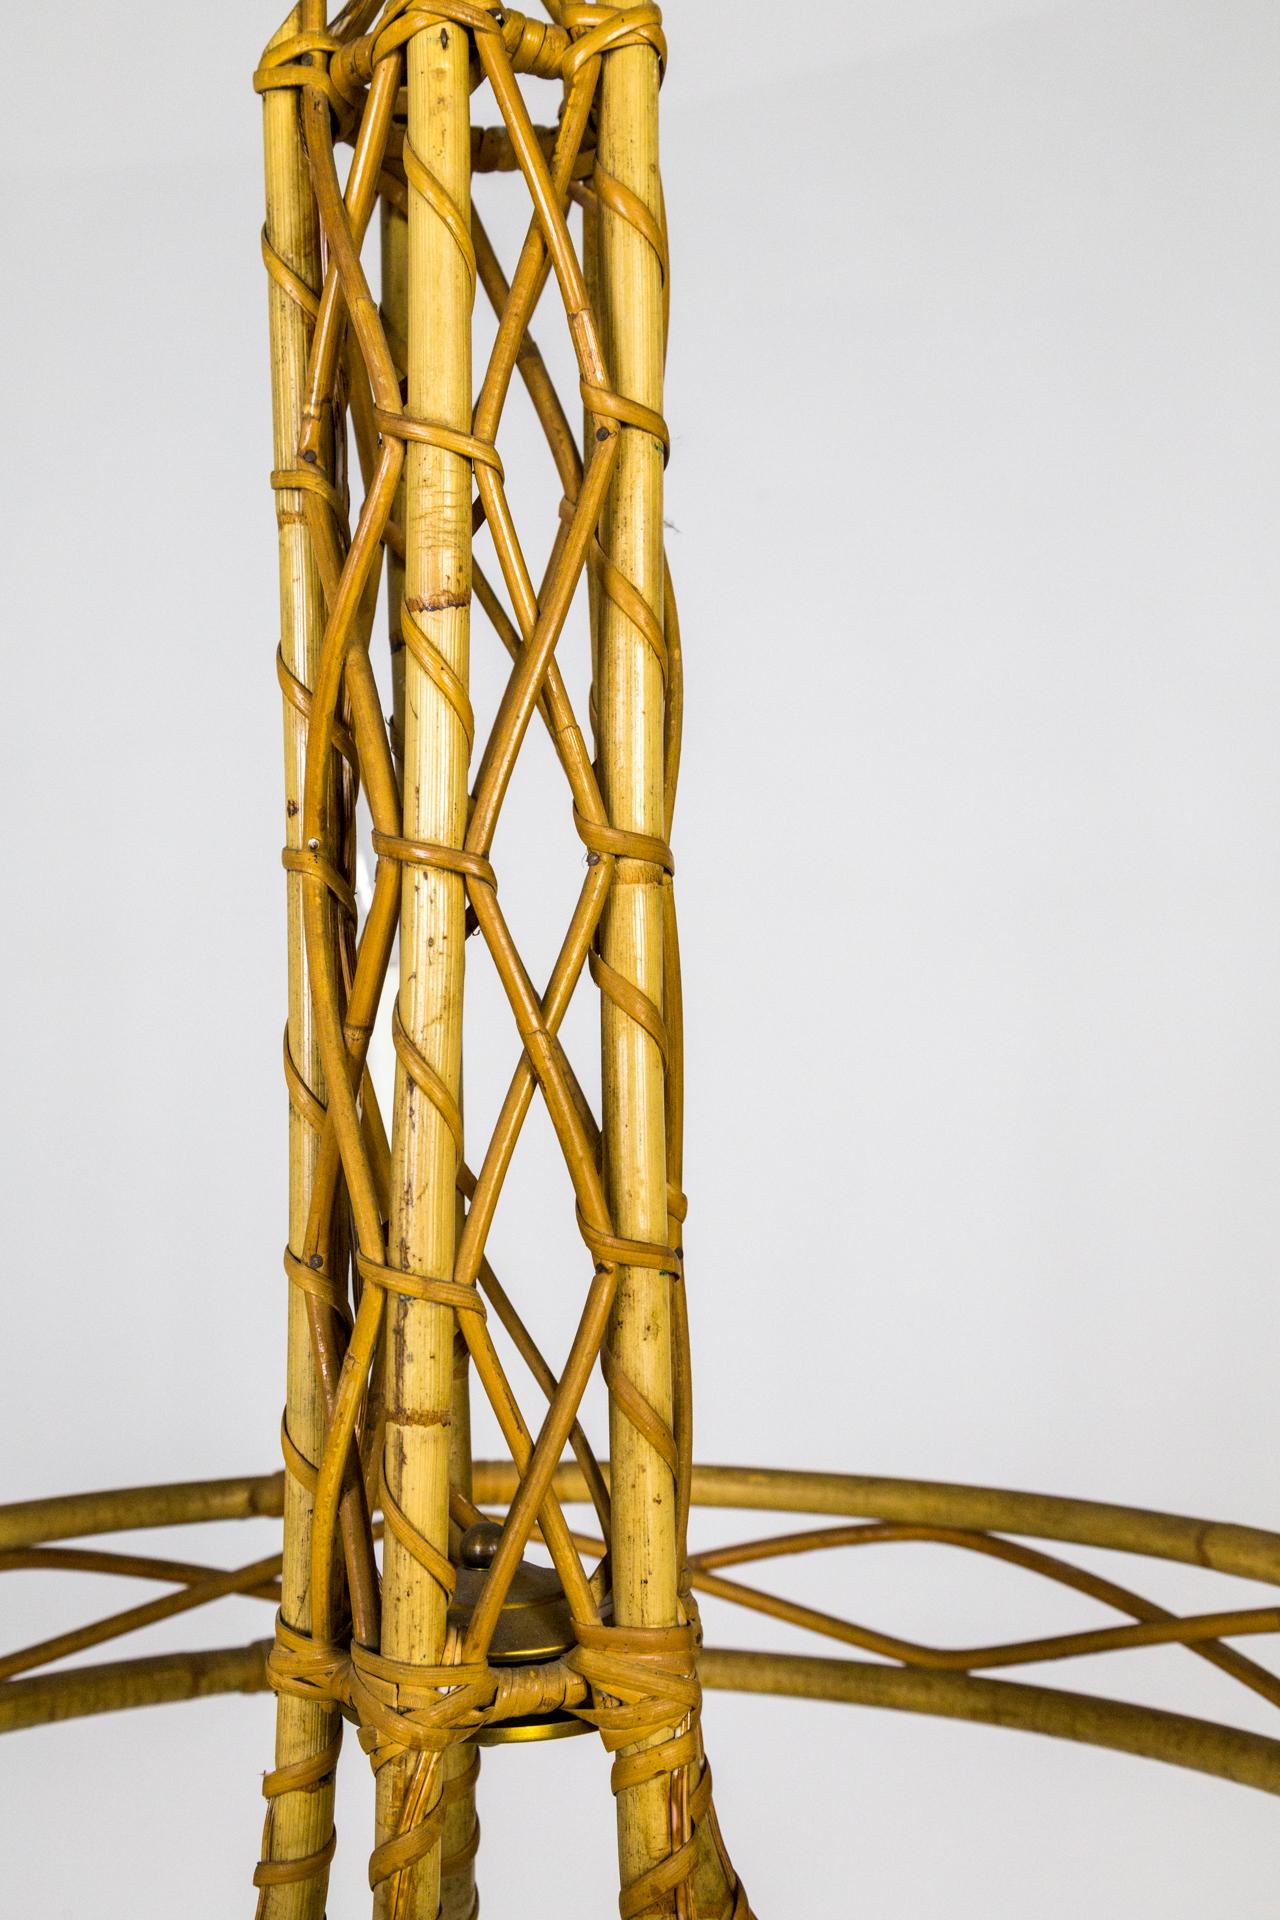 A 5-light, handmade chandelier made from bent bamboo pieces sweeping out and up, held by a bamboo ring structure. It's bound and decorated with woven rattan cane strips and zig-zagging, slender bamboo between the larger ones.  It has small, wood